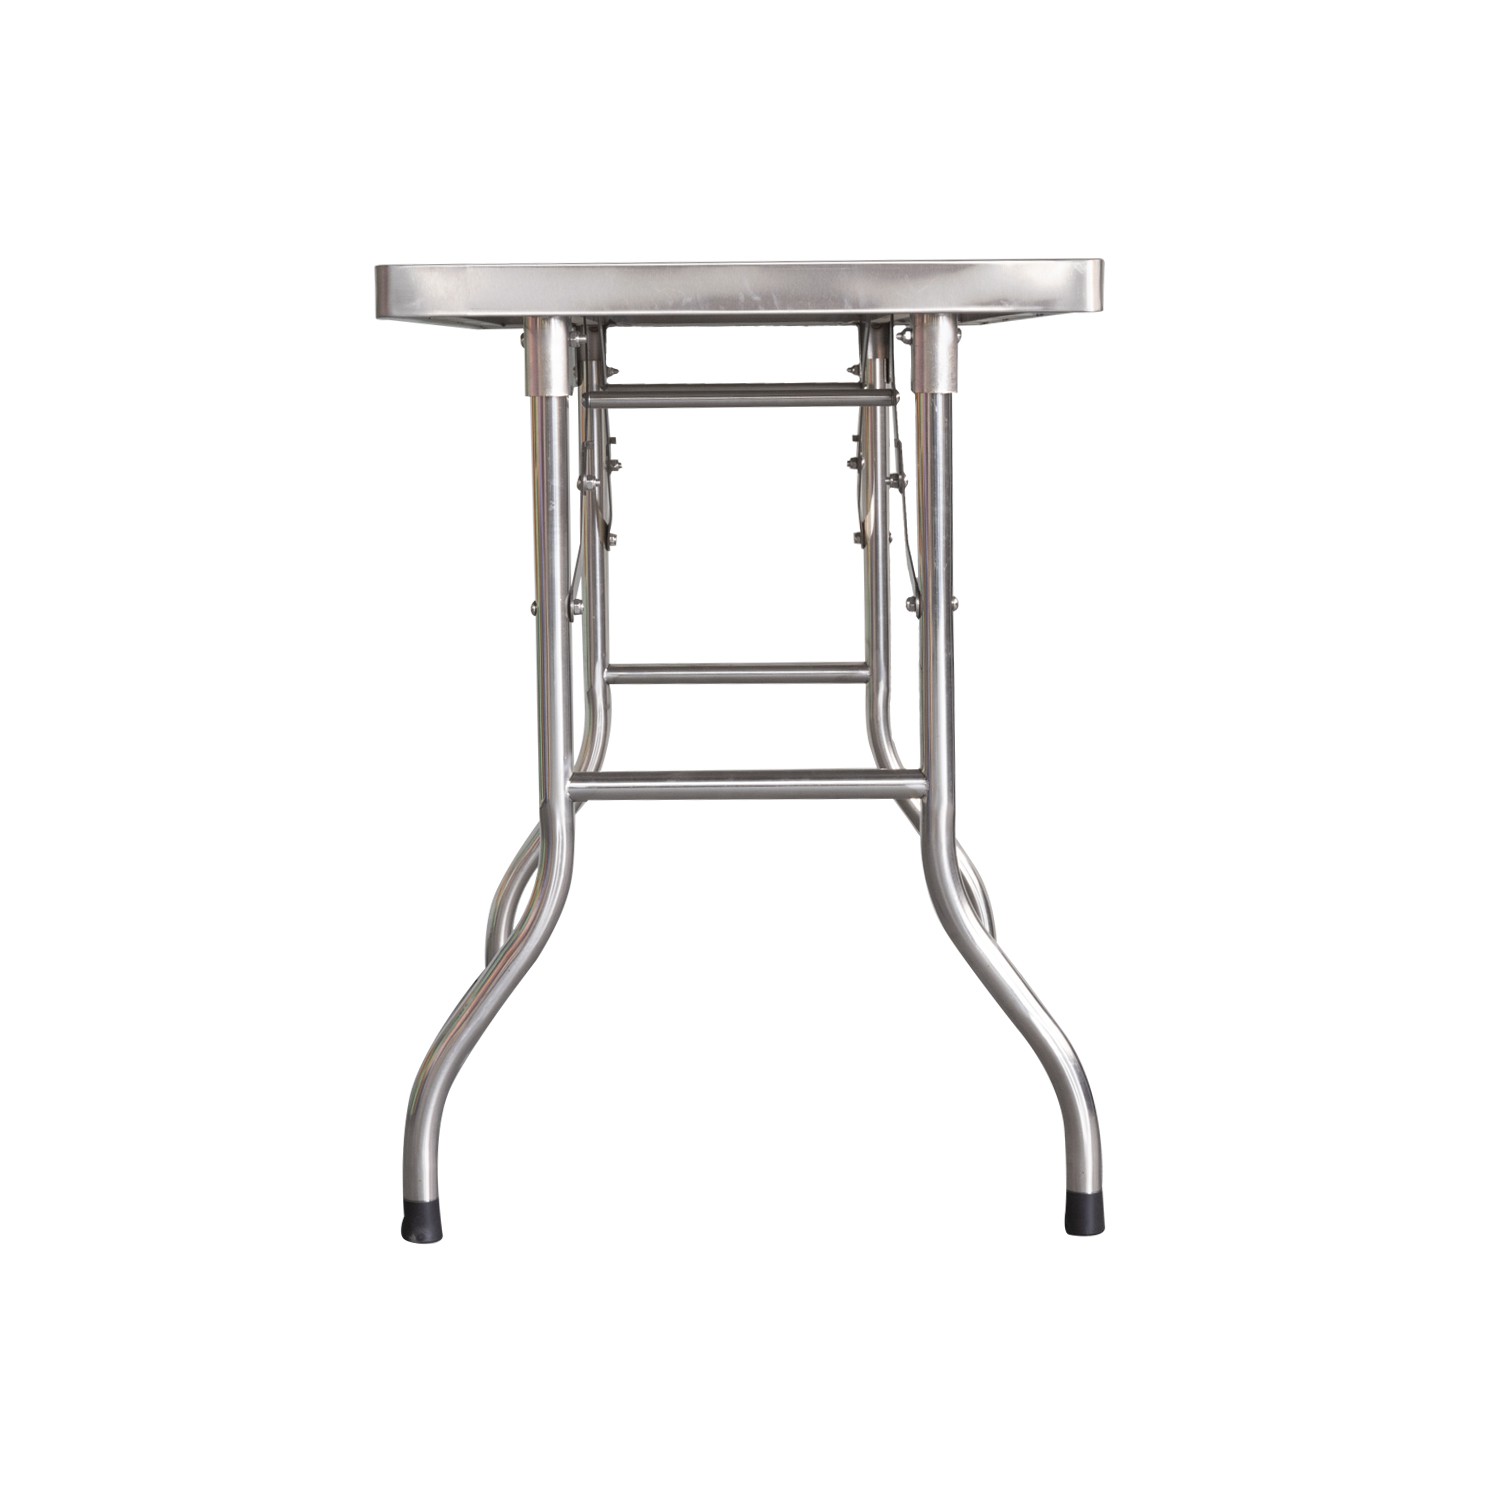 Foldable Stainless Steel Work Table